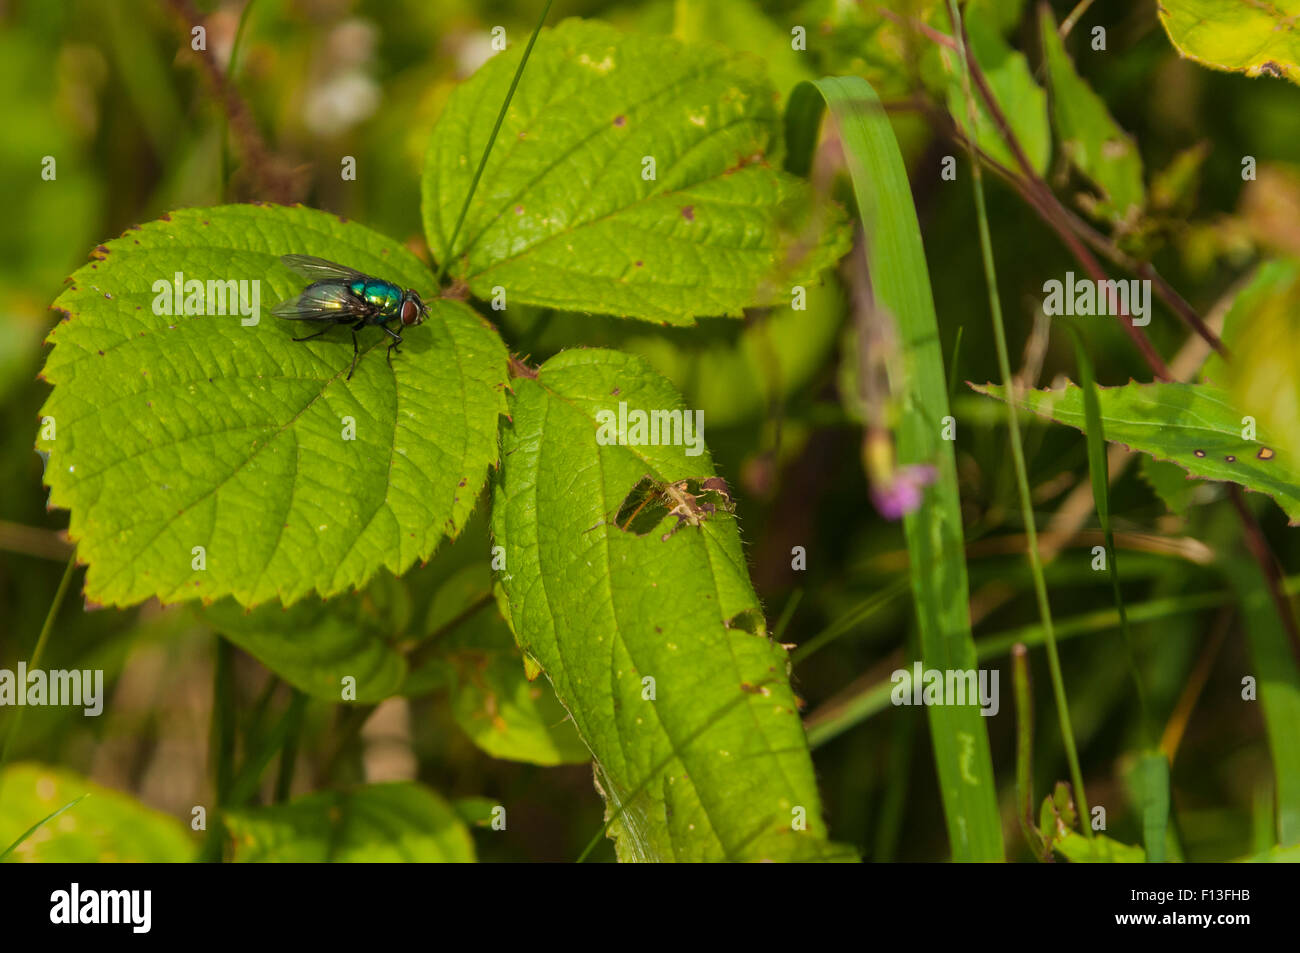 A Common Green bottle Fly, Phaenicia sericata or Lucilia sericata, at rest on a leaf. Stock Photo